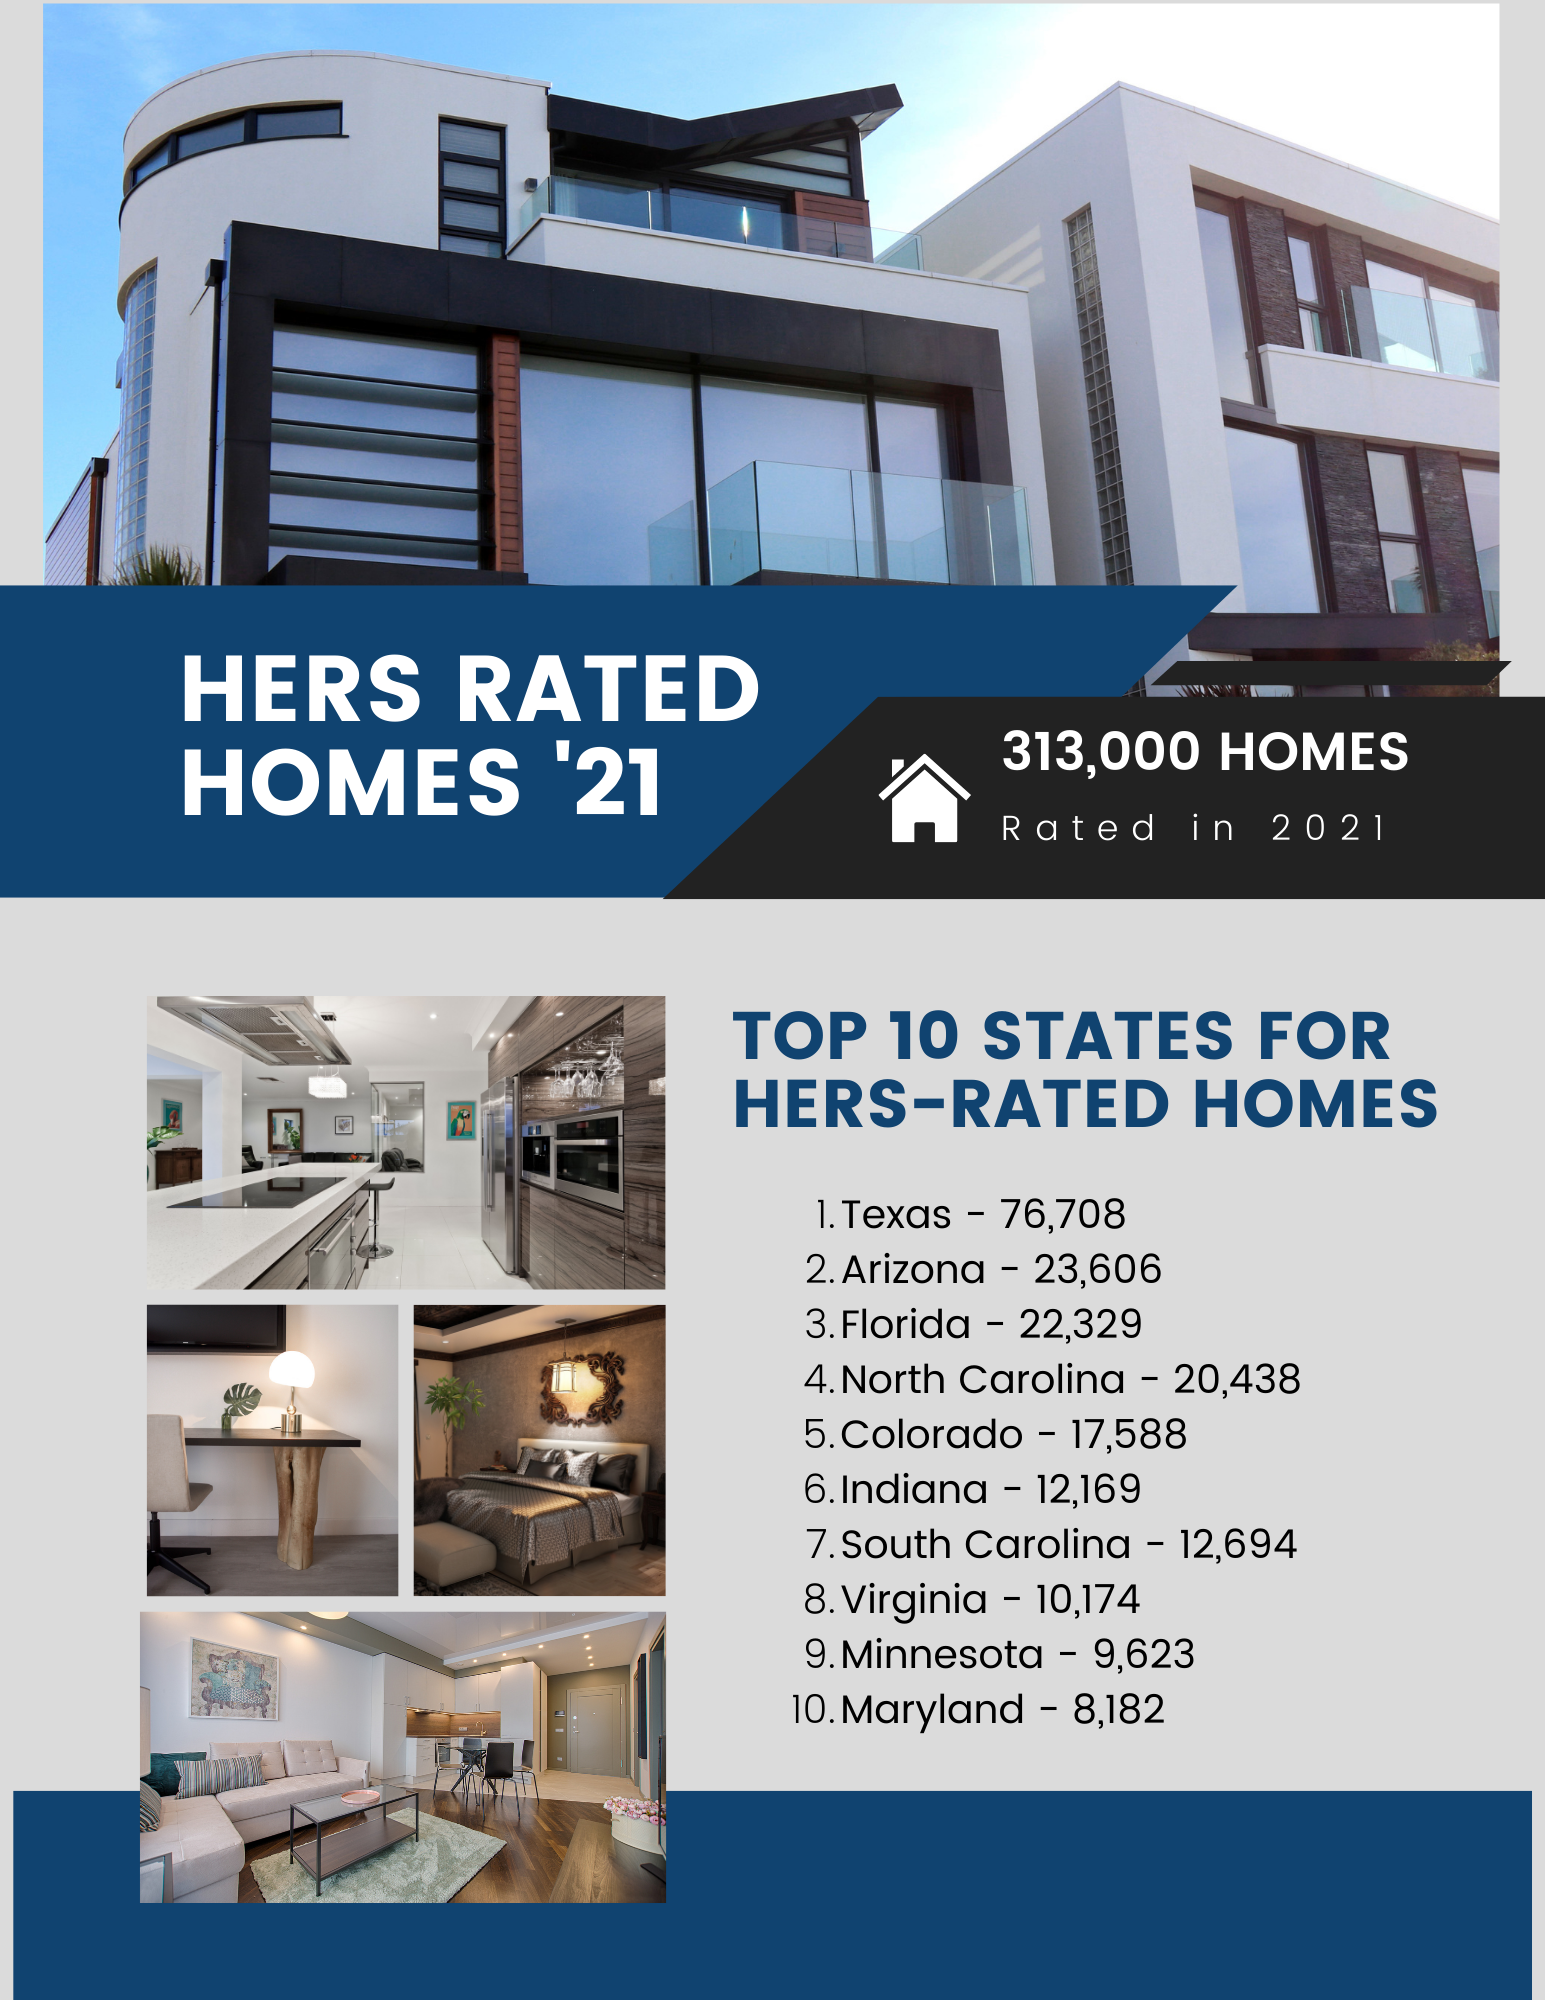 Top 10 States for HERS-Rated Homes